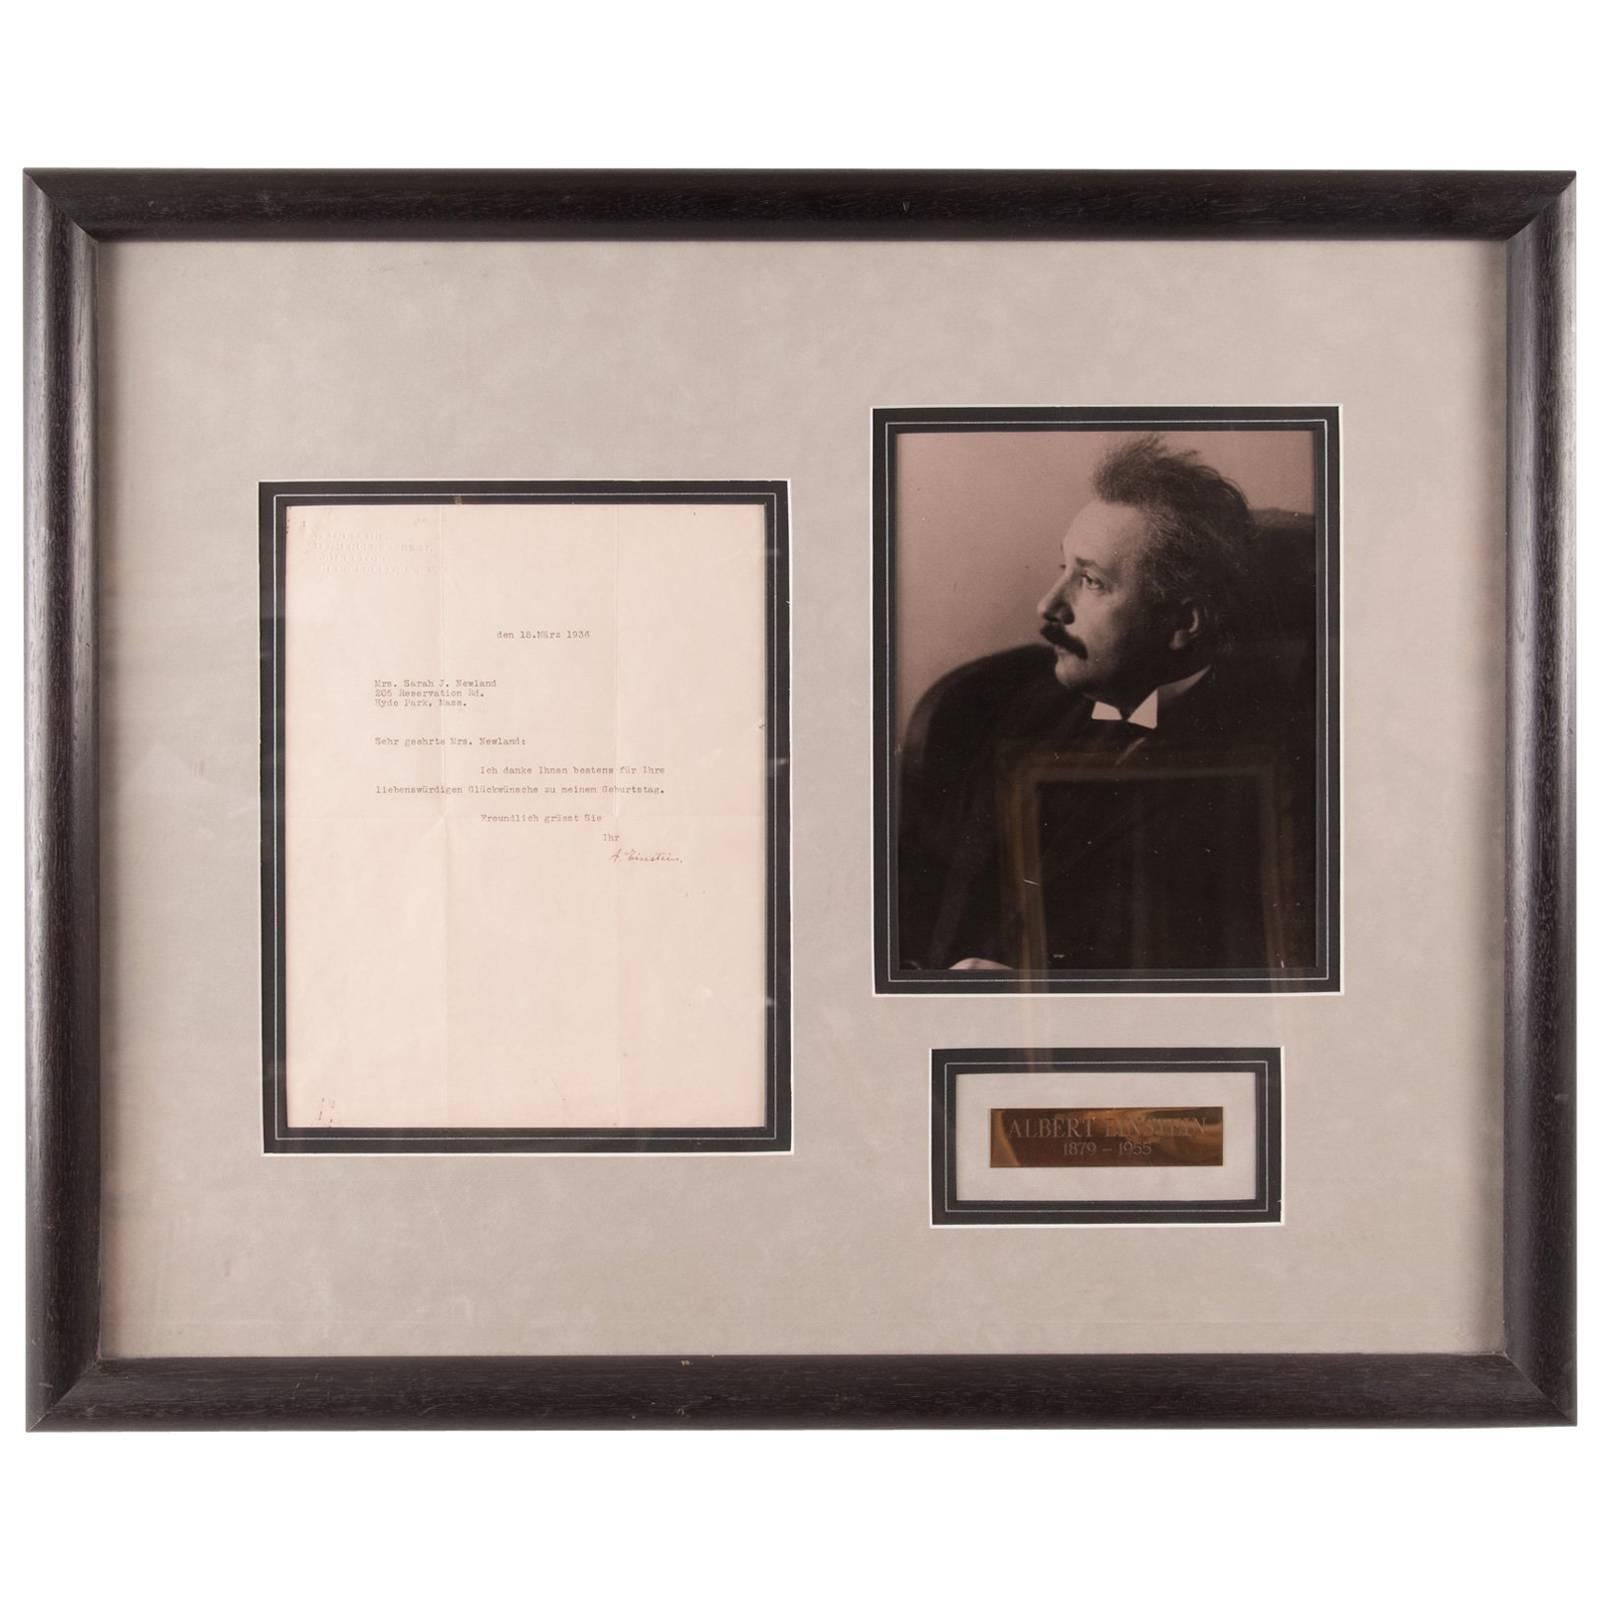 Framed Letter and Photograph from Albert Einstein to Sarah Newland